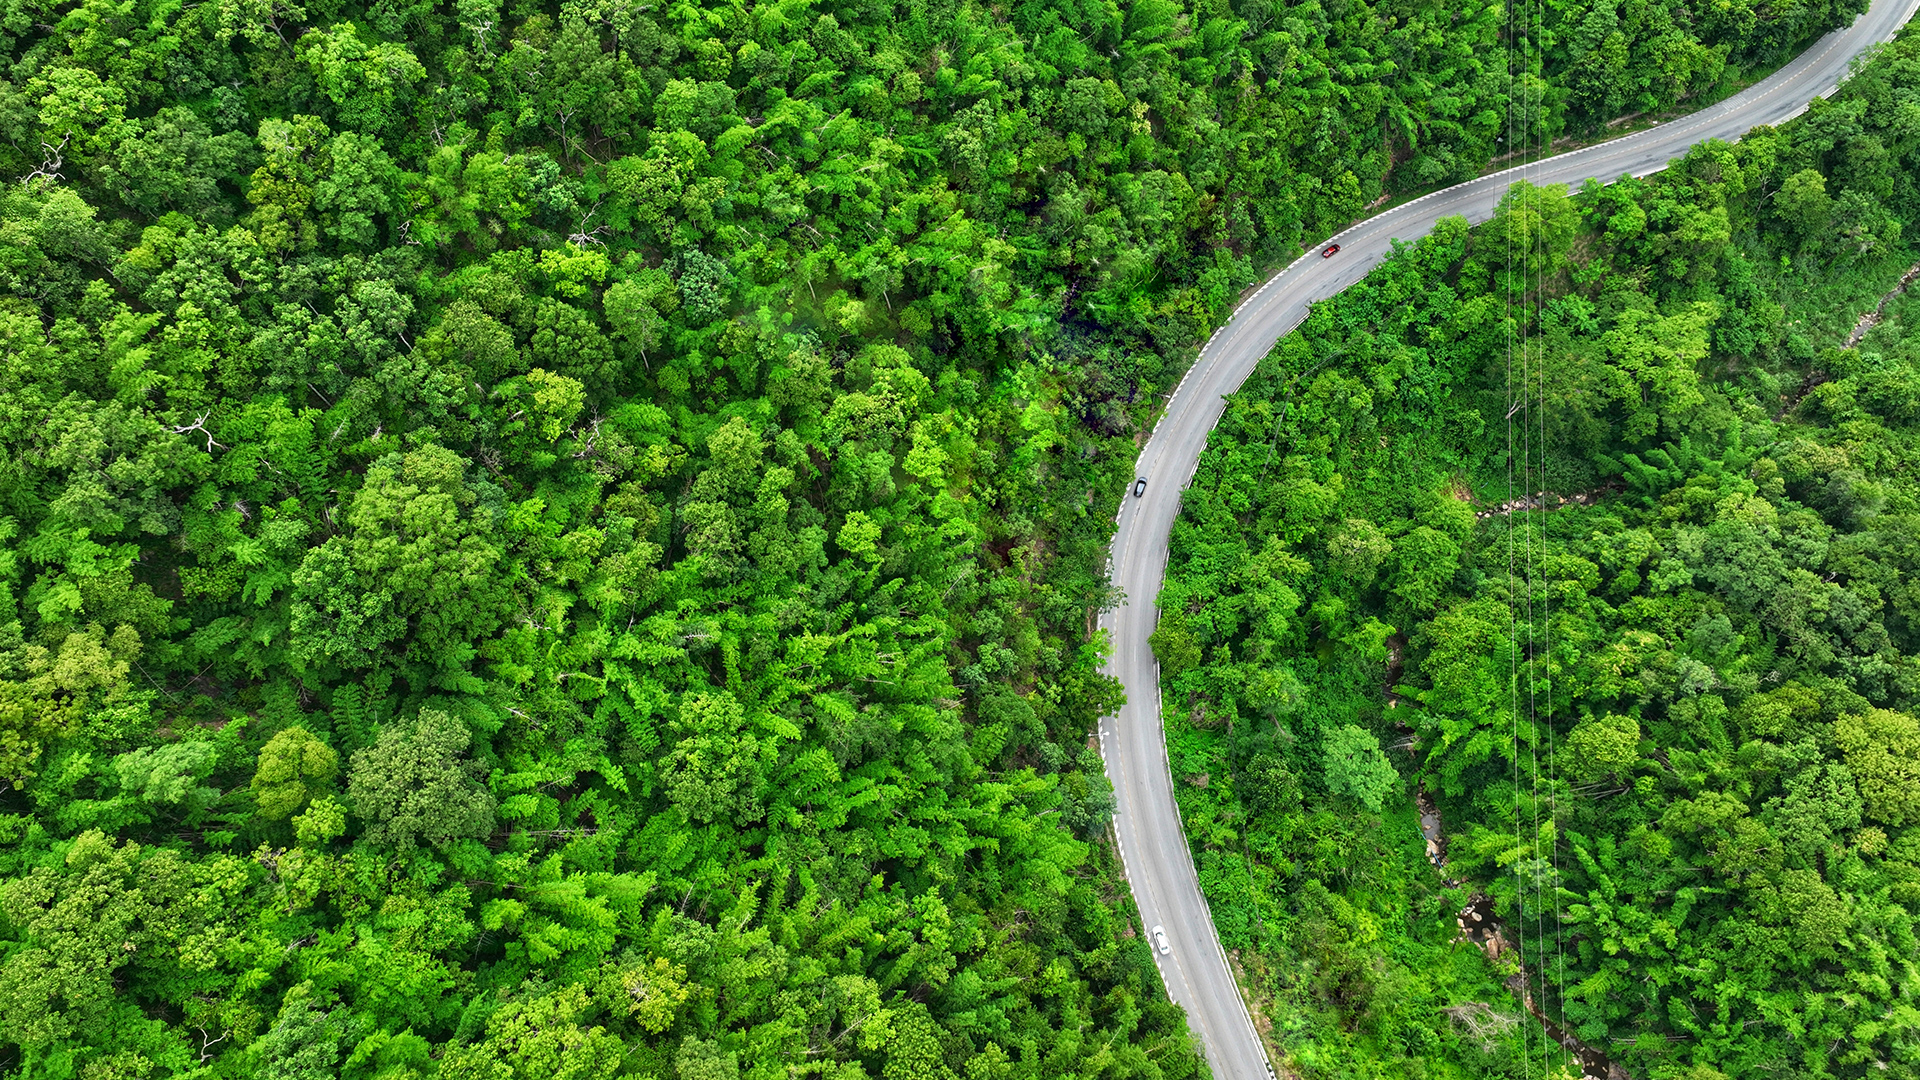 Aerial view of a winding road cutting through a densely forested area. The lush green trees cover the landscape on both sides of the road, demonstrating a vibrant natural scene. Emerging practices in sustainable building are subtly visible as a few eco-friendly structures blend with the environment along the curved road.